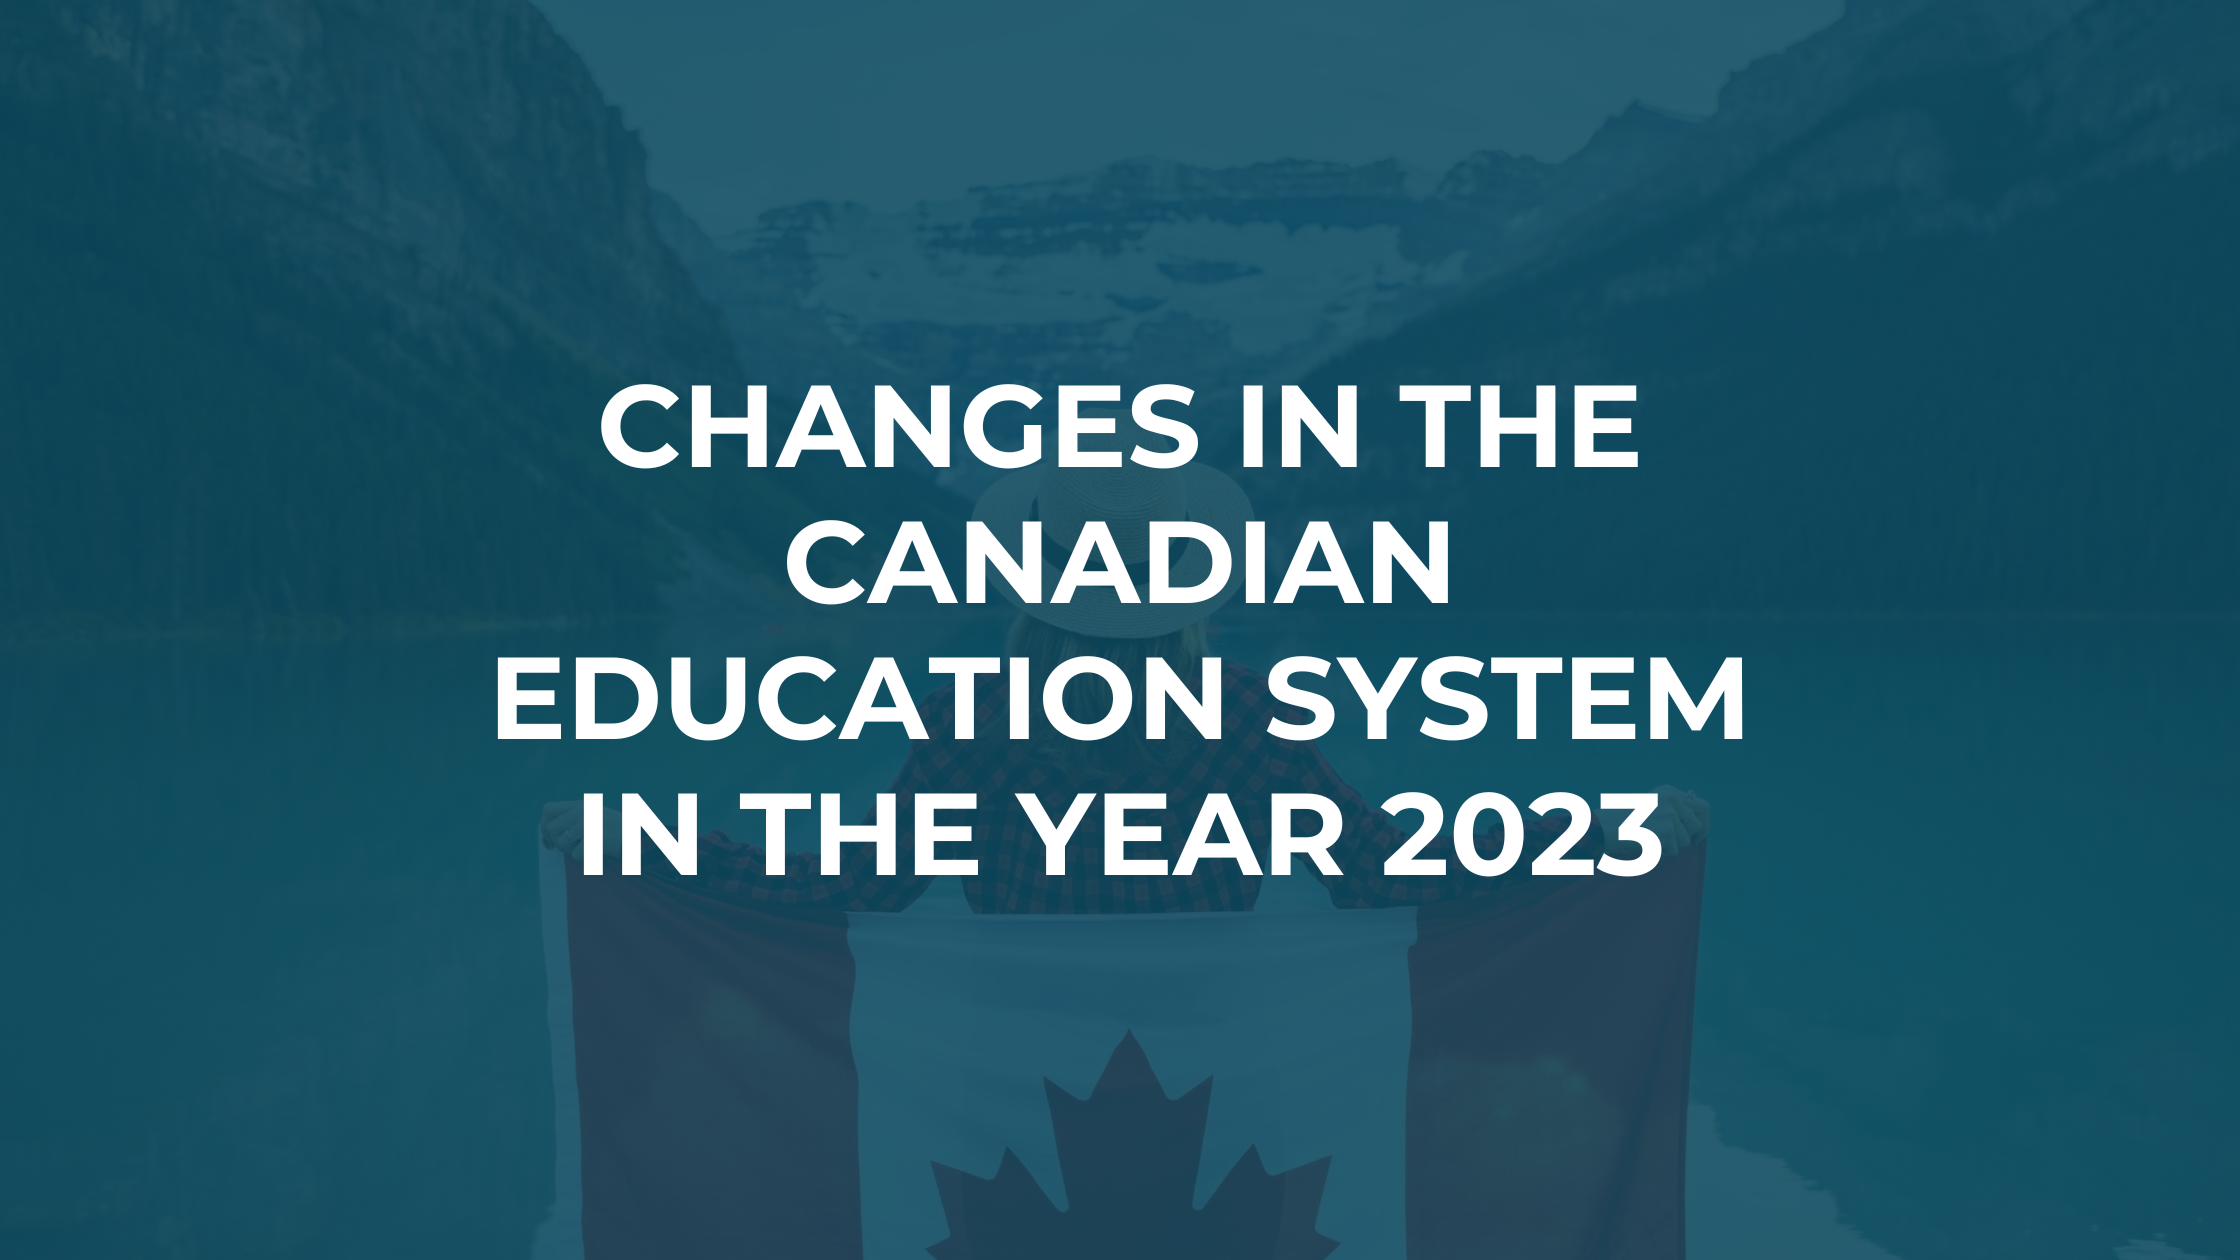 changes in canadian education system in 2023